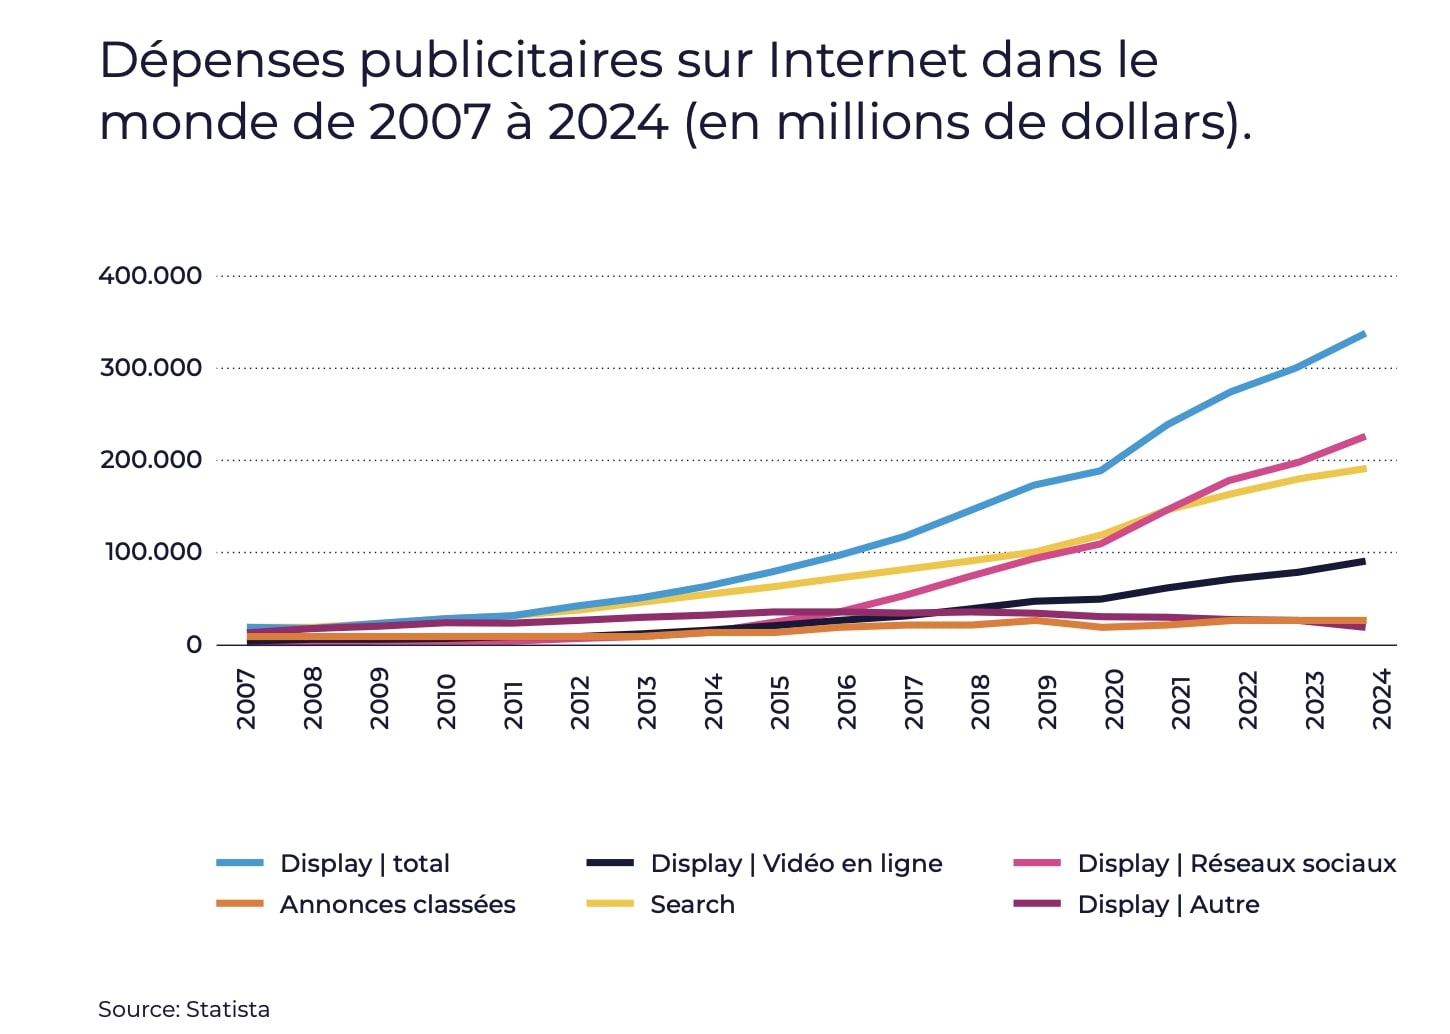 Internet advertising expenditure worldwide from 2007 to 2024 (in million dollars): increase